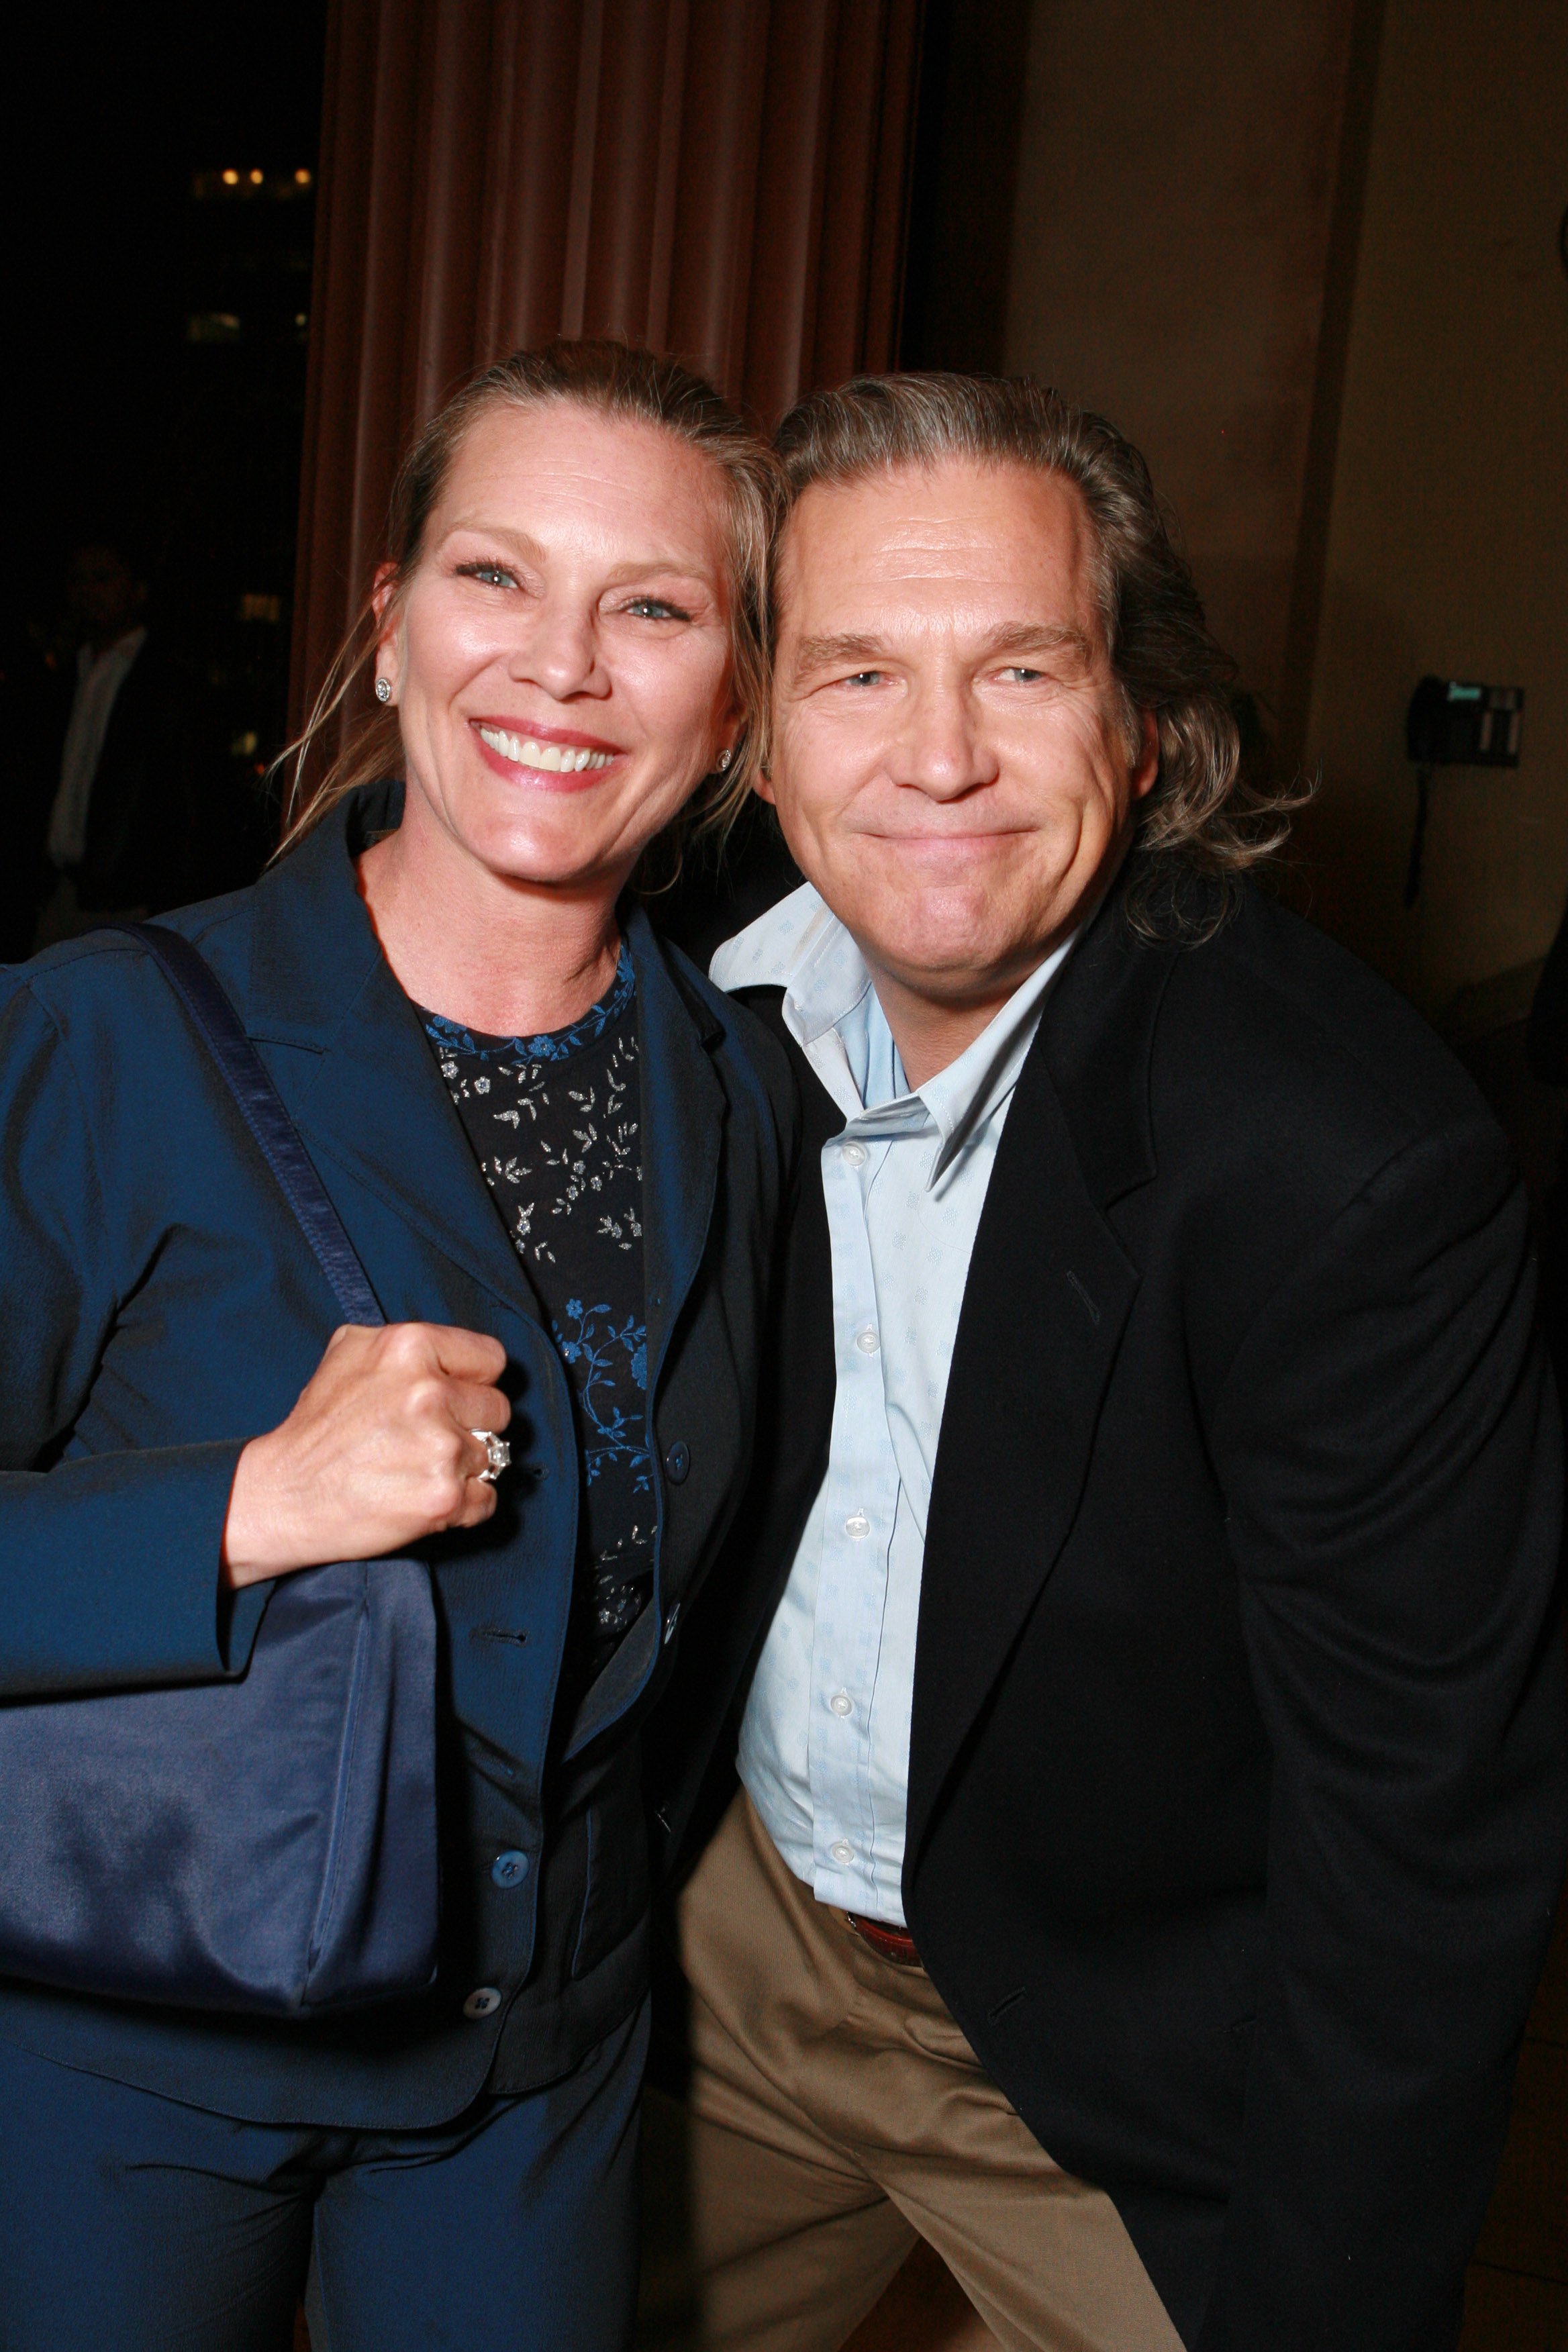 Susan Bridges and Jeff Bridges during Special Screening of Touchstone Pictures' "Stick It" at El Capitan in Hollywood, California, United States.  | Source: Getty Images